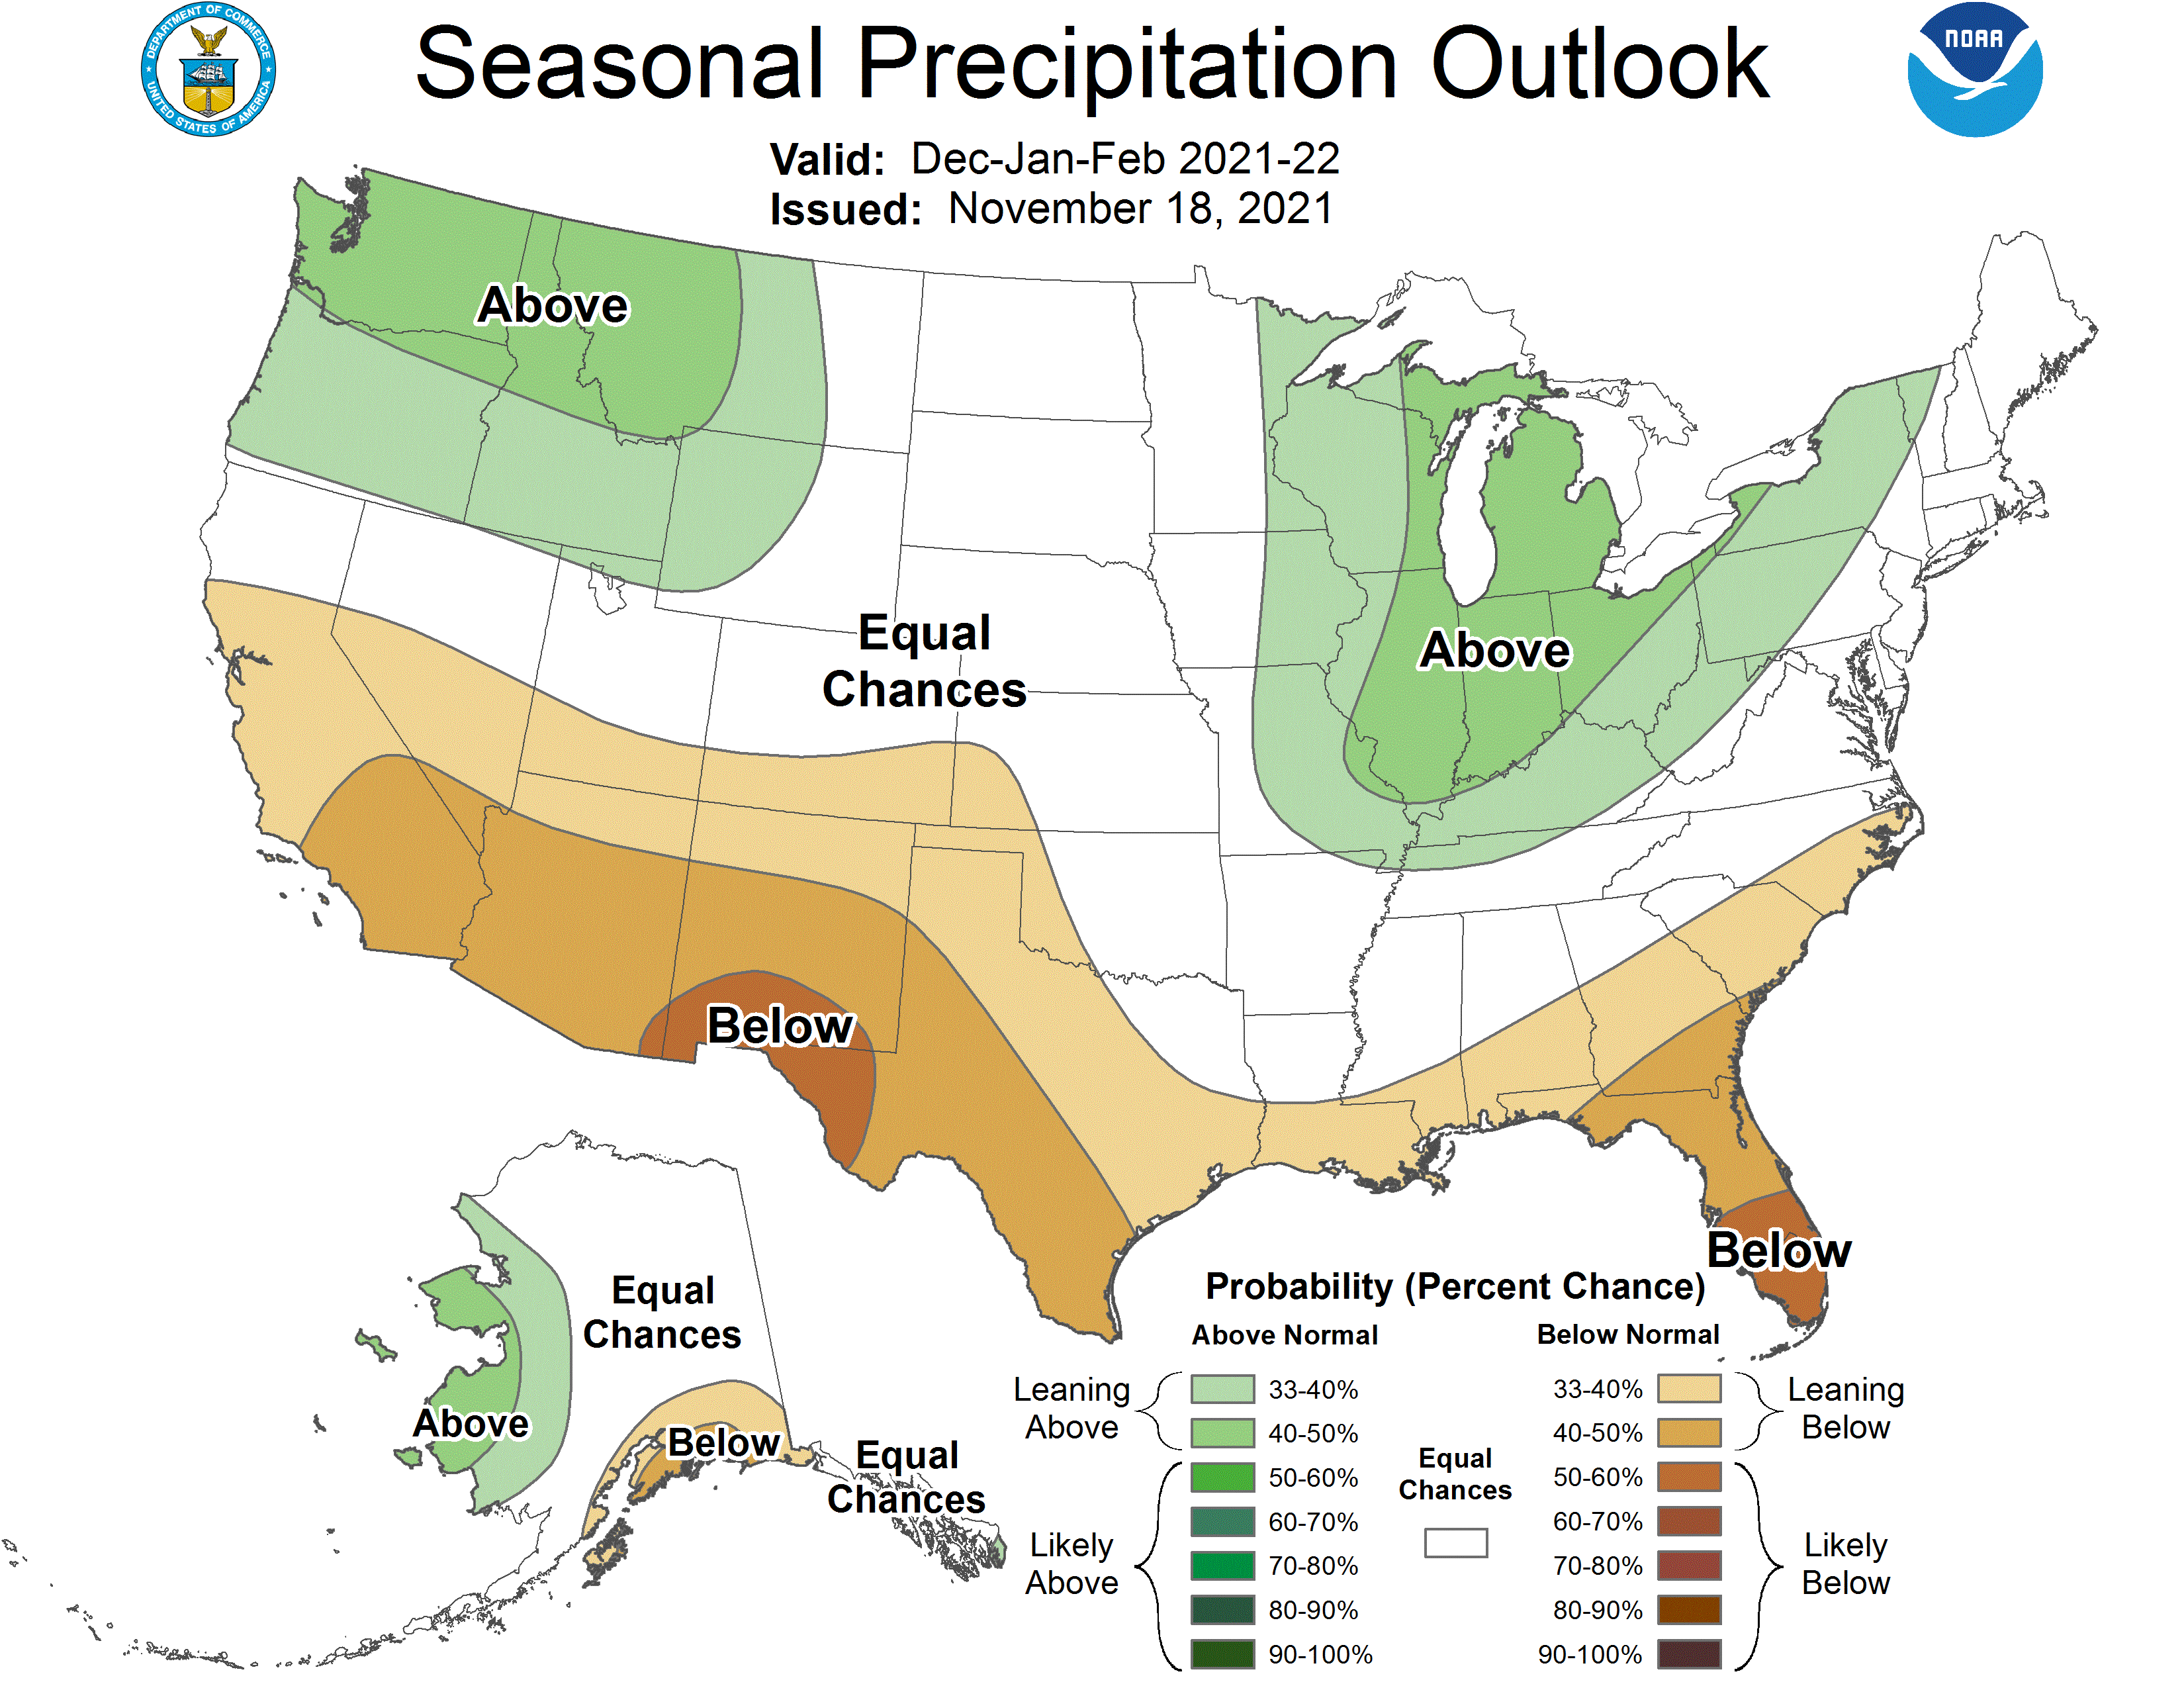 U.S. Winter Precipitation Outlook from the Climate Prediction Center